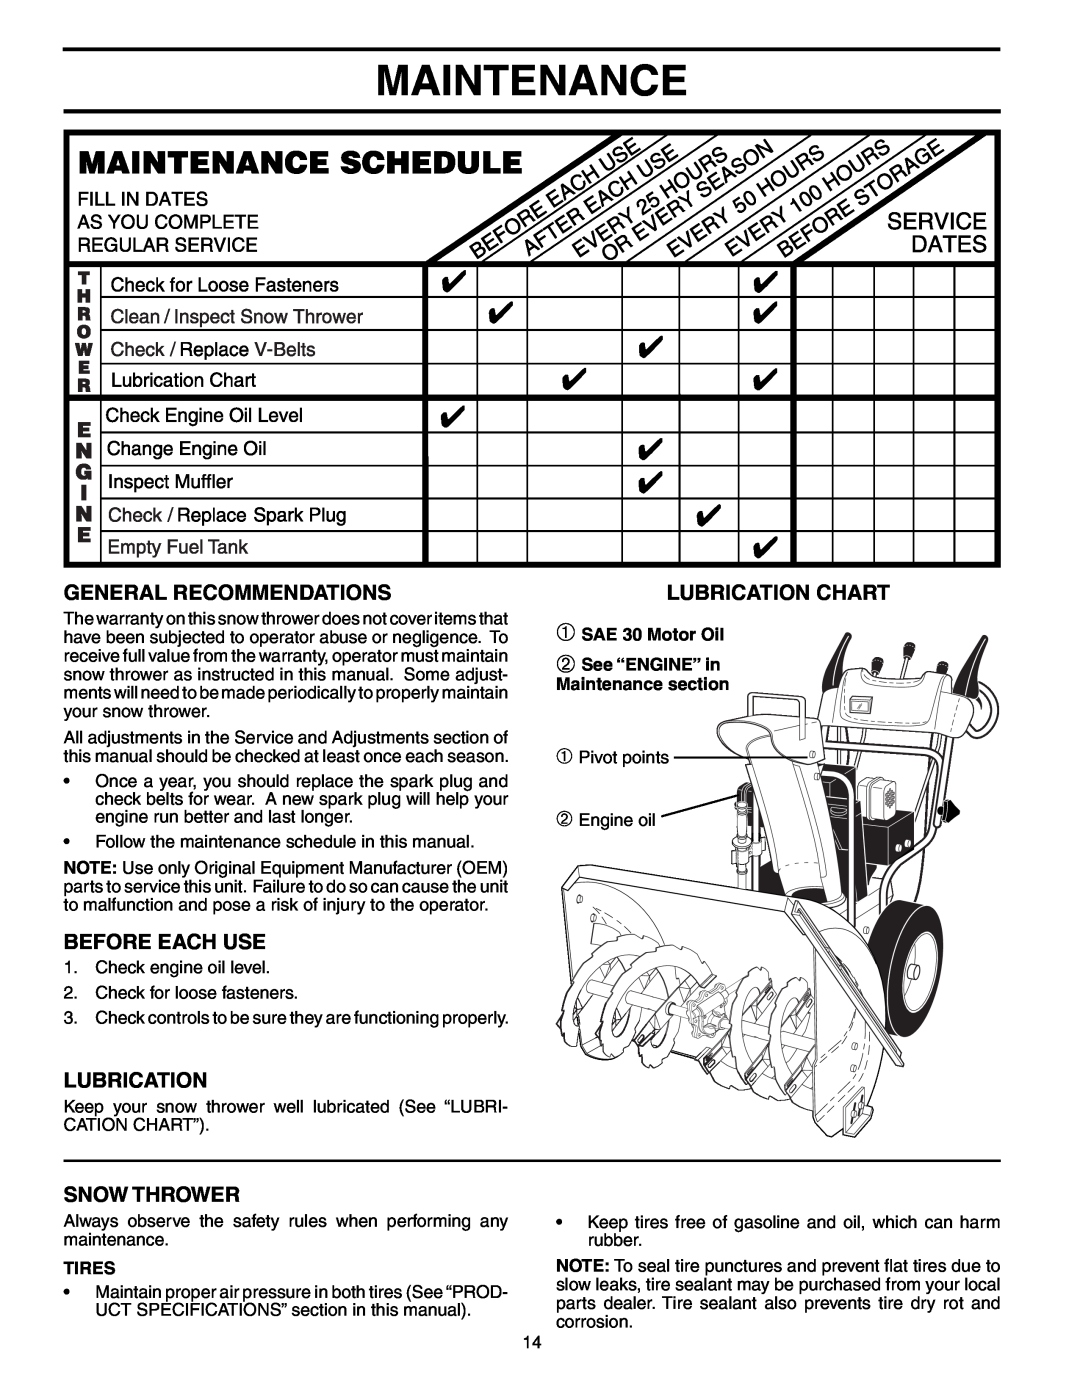 Poulan PP1130ESC Maintenance, General Recommendations, Before Each Use, Snow Thrower, Lubrication Chart, Tires 